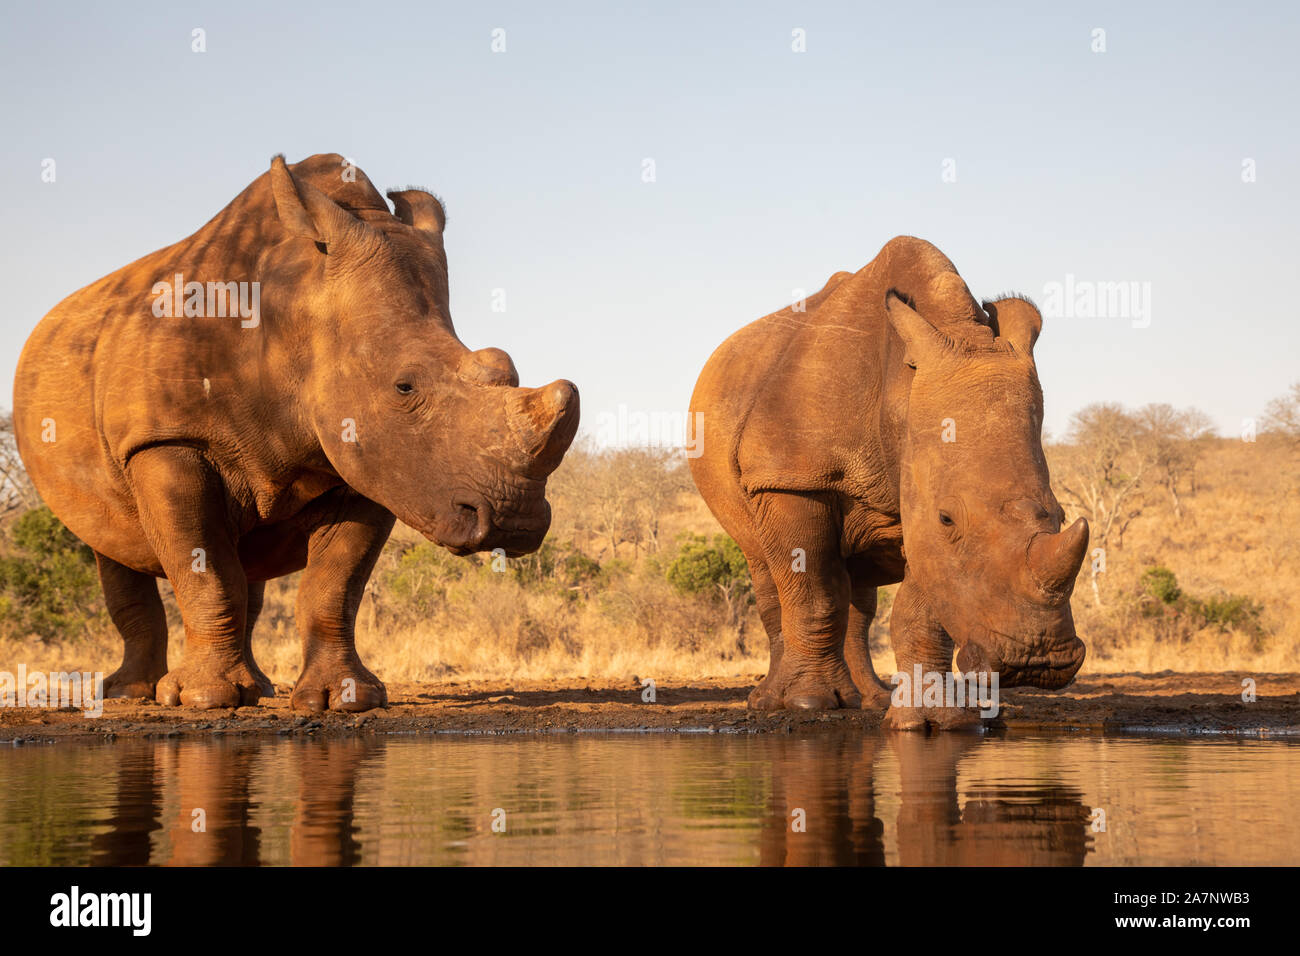 An adult and baby rhinoceros drinking together from a pool in Zimanga private game reserver Stock Photo